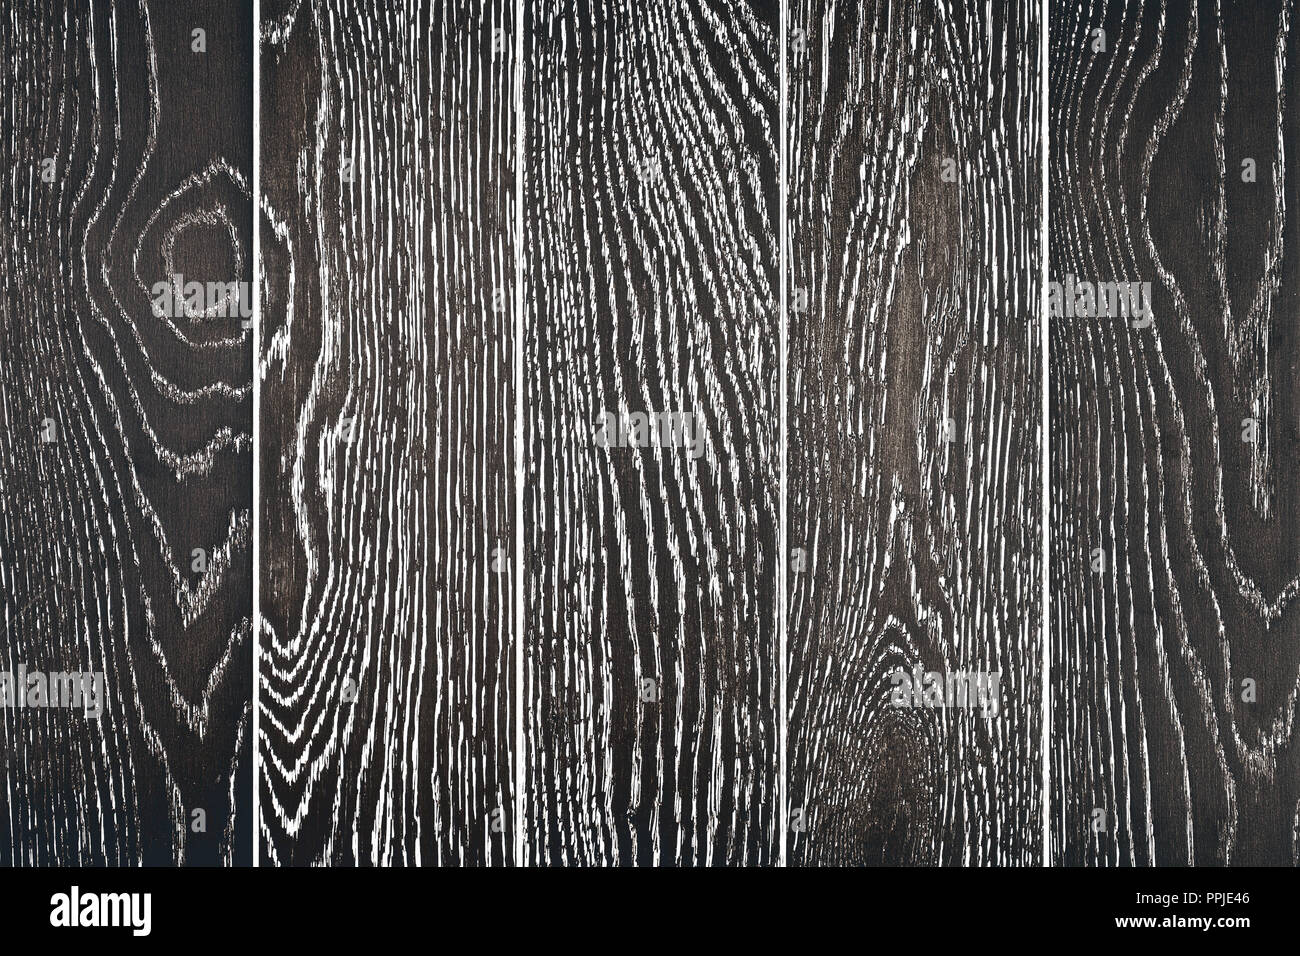 wall of black painted oak boards, background Stock Photo